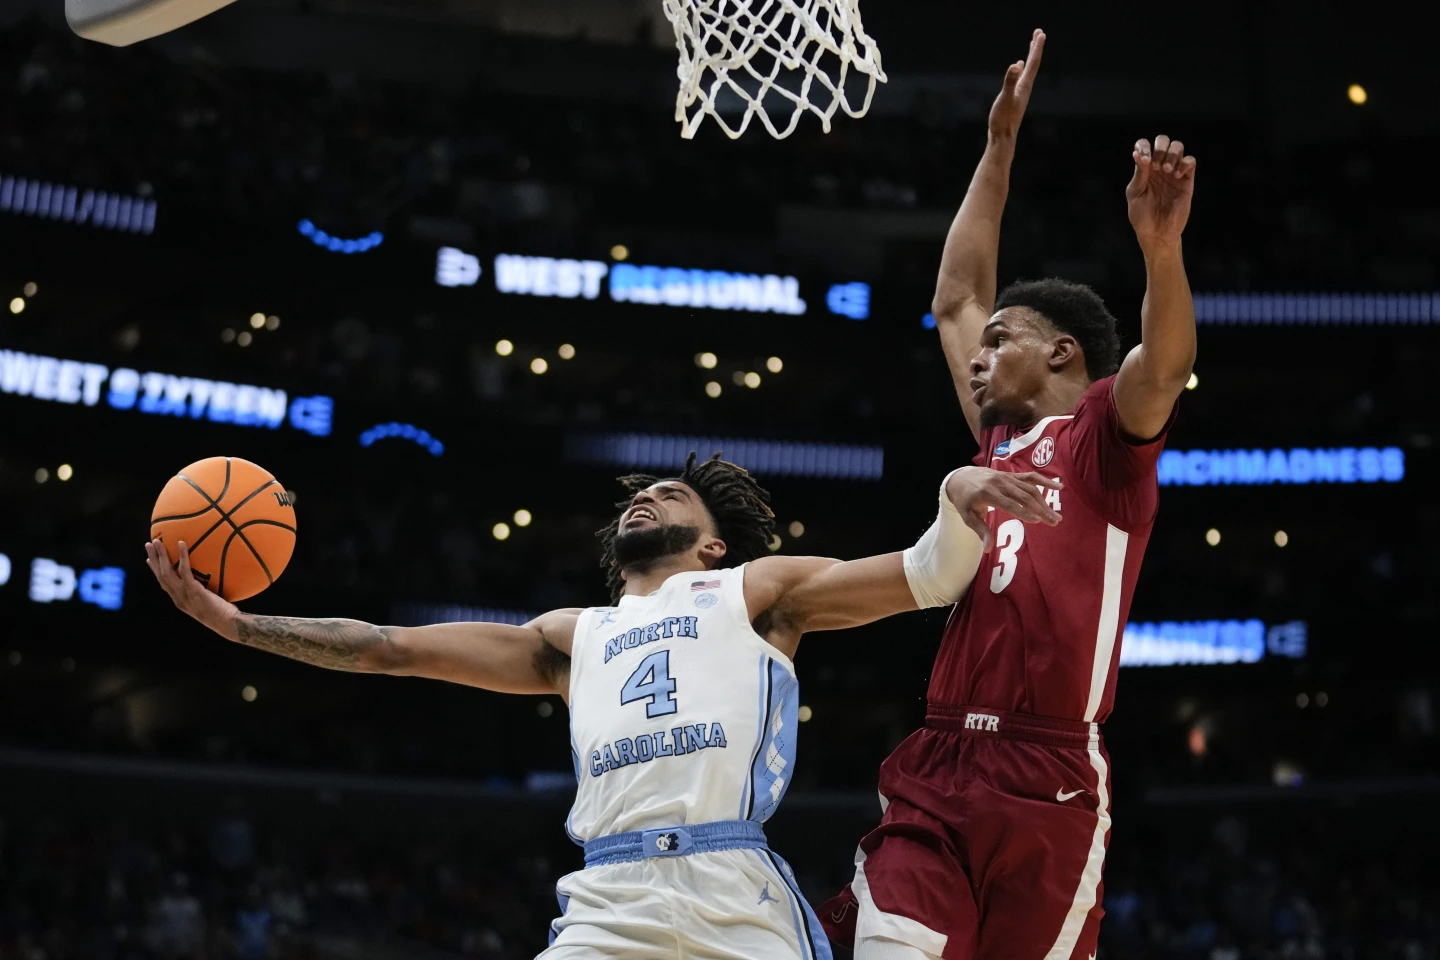 Alabama holds off top-seeded North Carolina 89-87 to reach Elite Eight